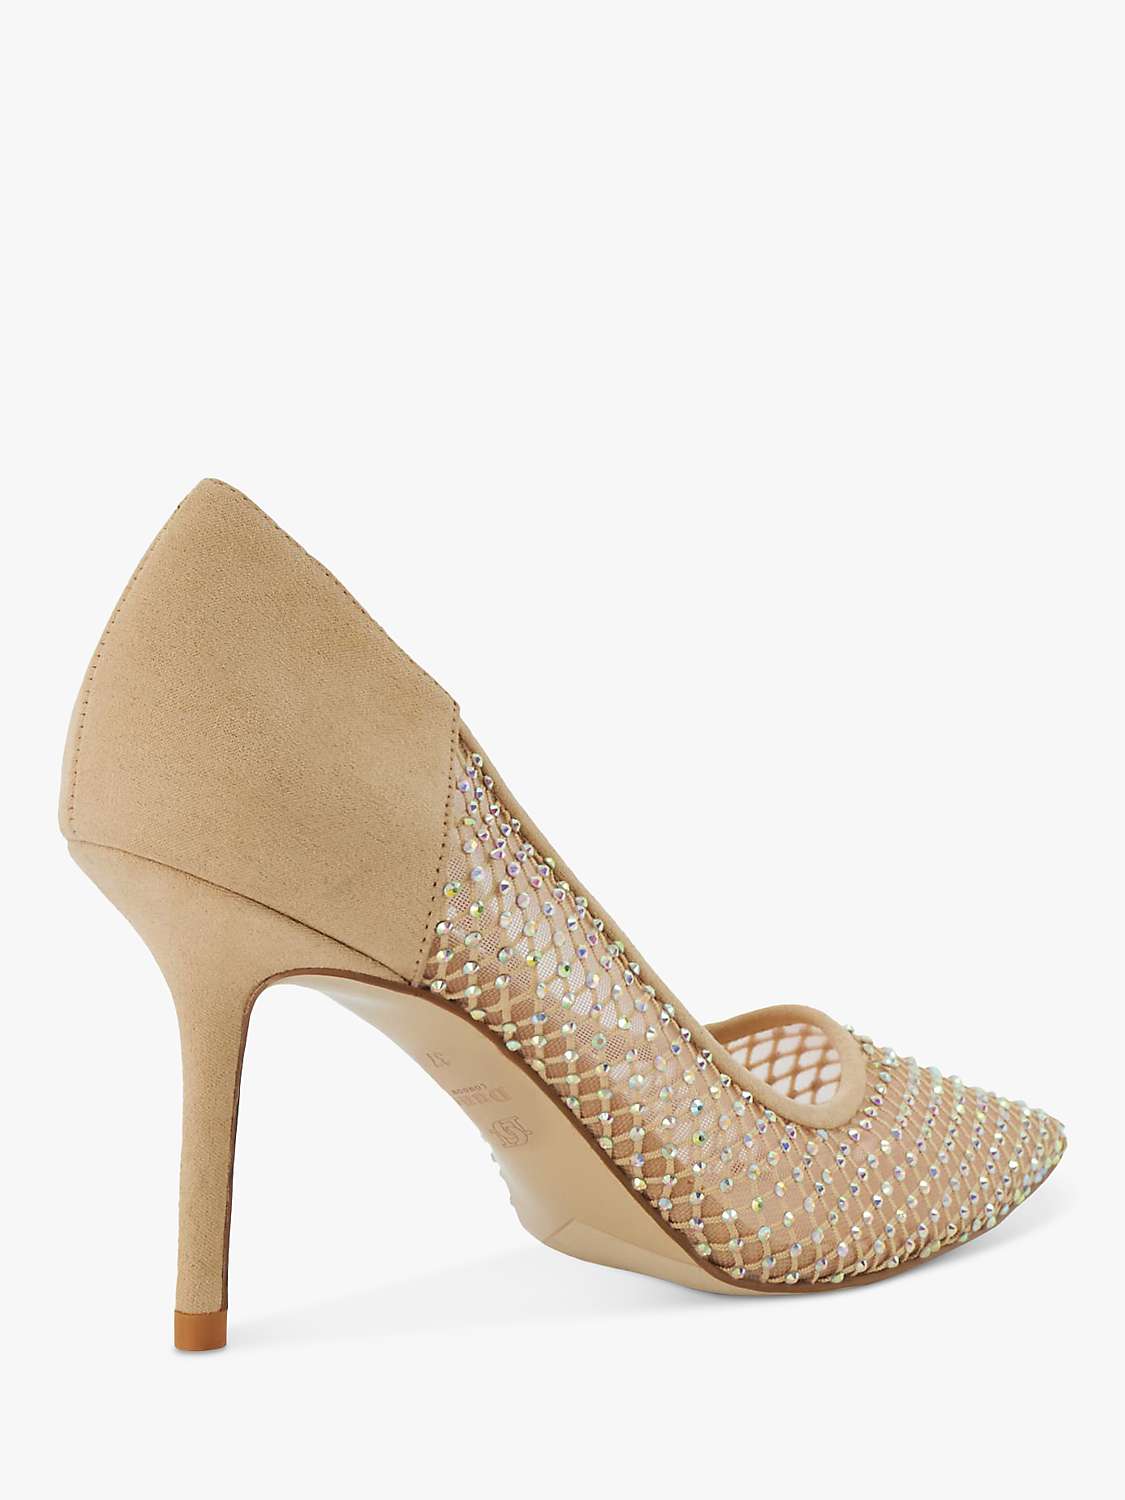 Buy Dune Affect Mesh Pointed Toe Diamante Court Shoes, Ecru Online at johnlewis.com